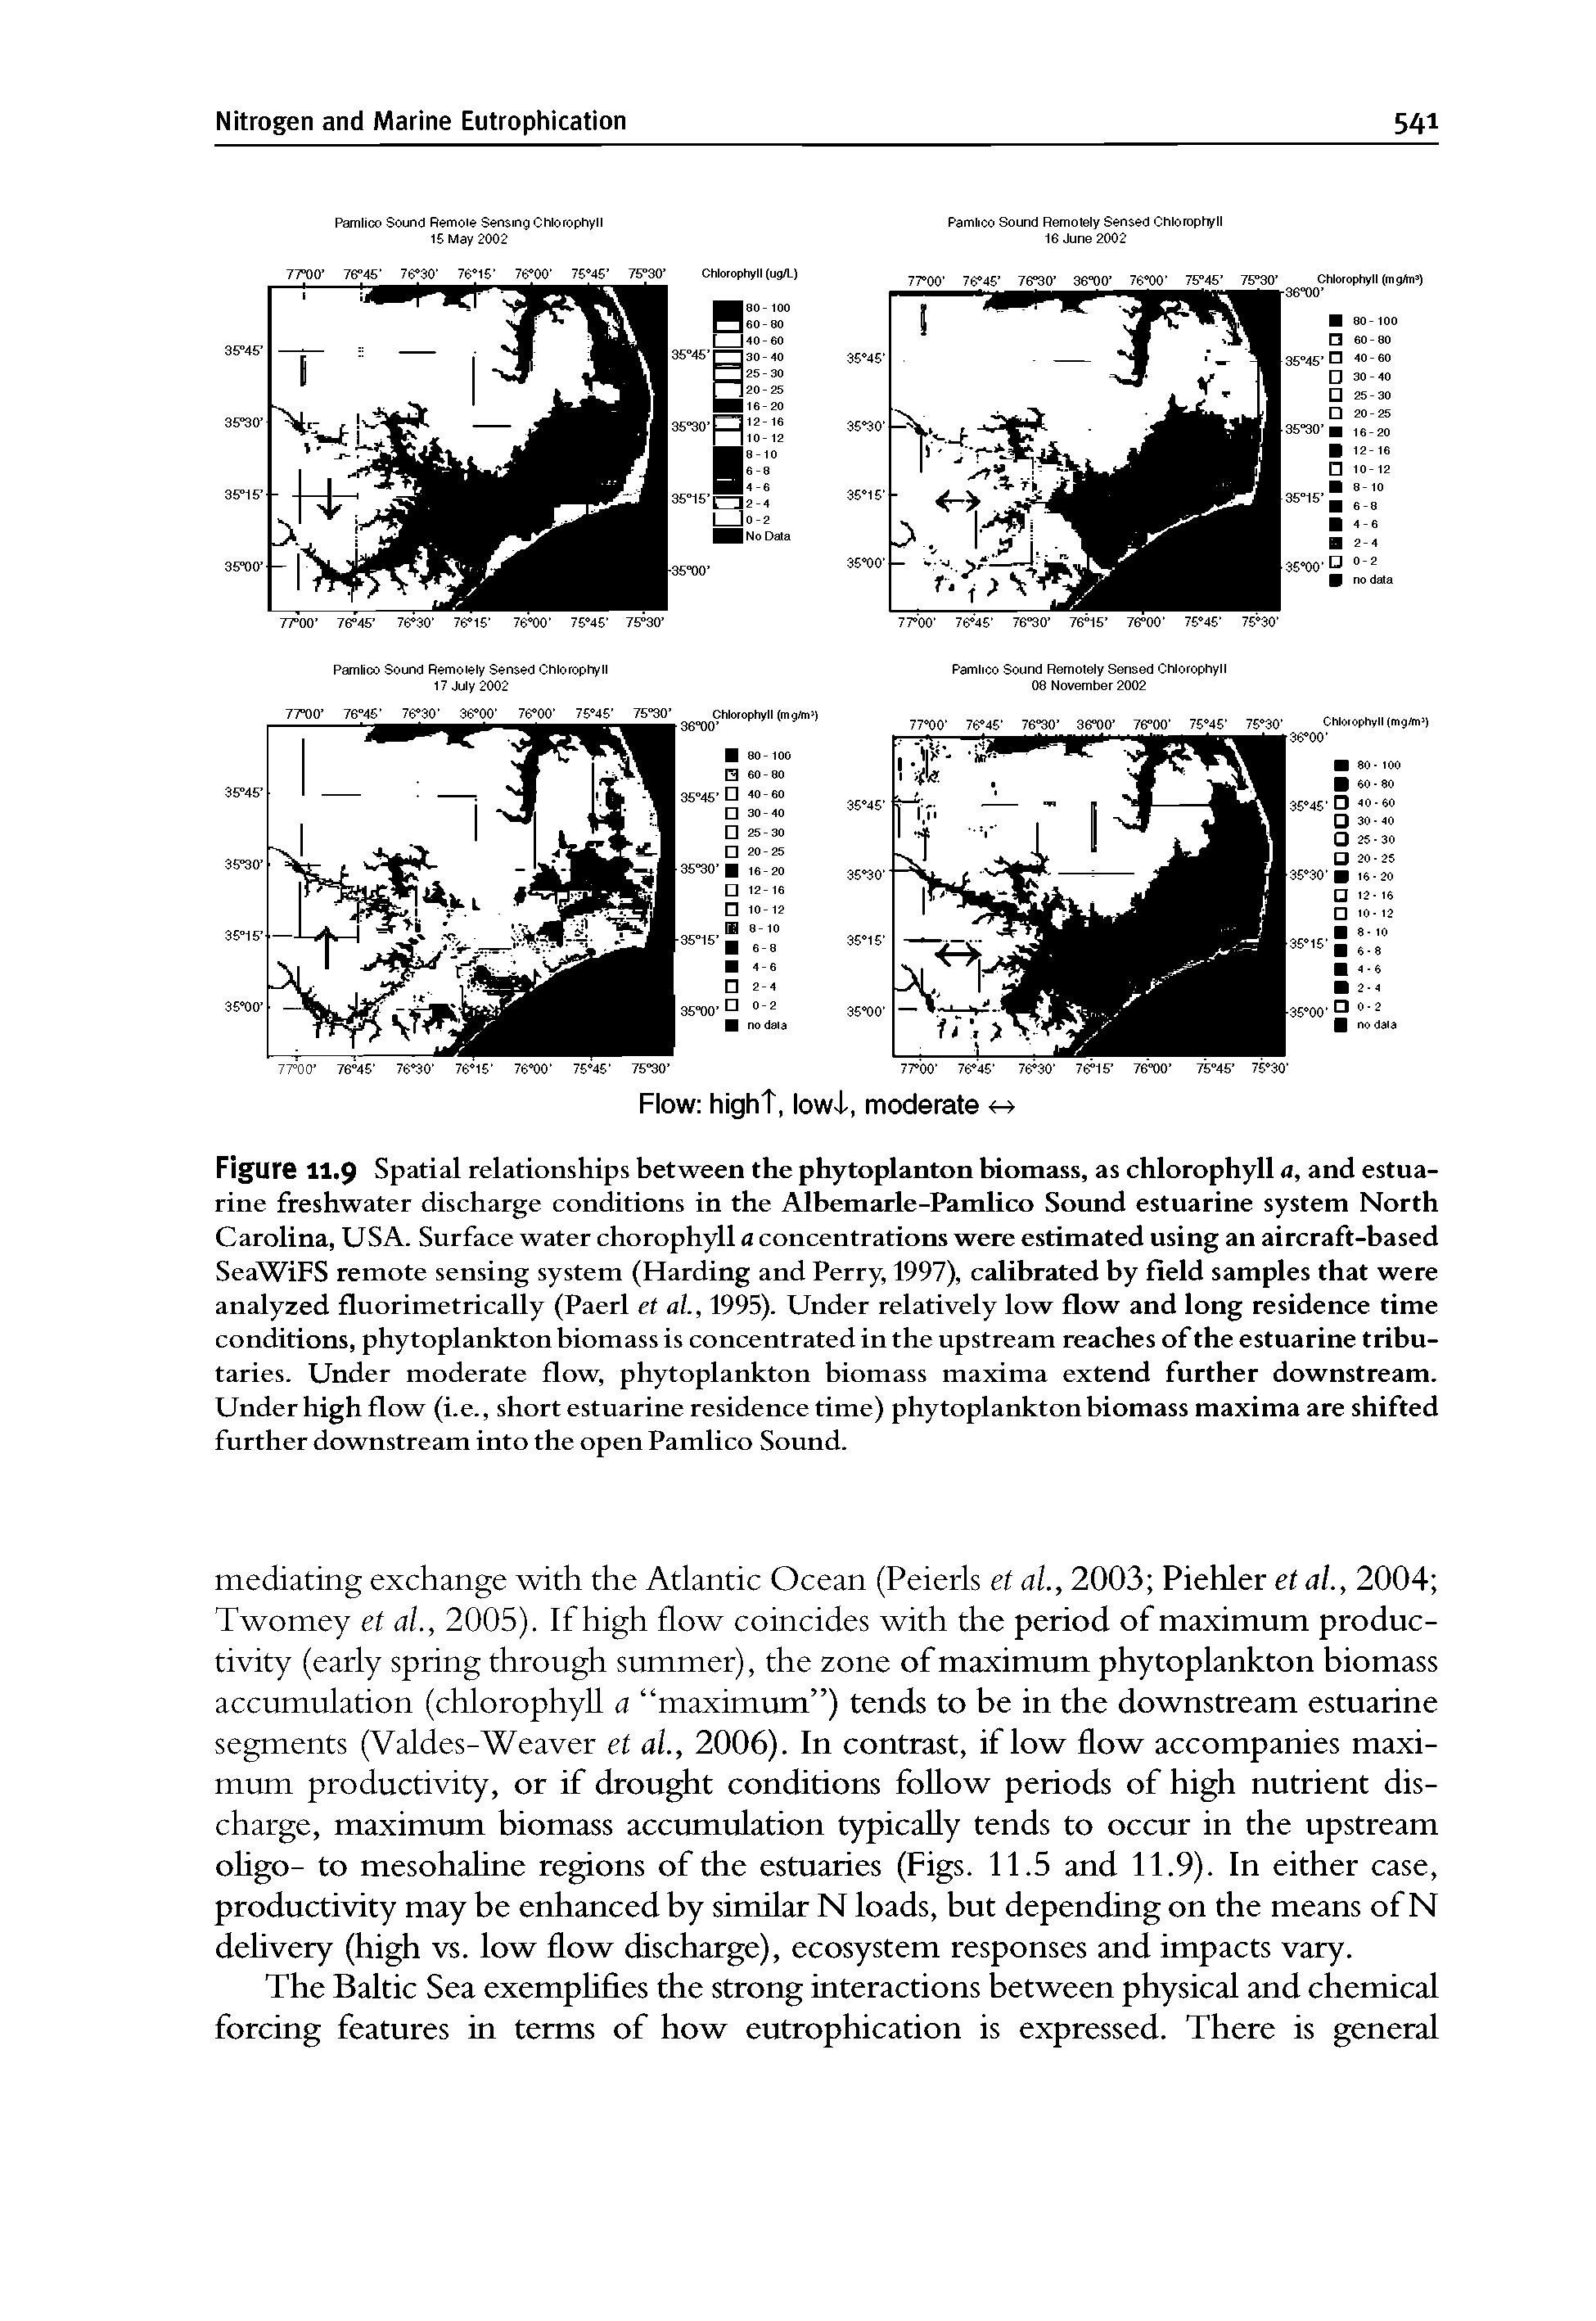 Figure 11.9 Spatial relationships between the phytoplanton biomass, as chlorophyll a, and estuarine freshwater discharge conditions in the Albemarle-Pamlico Sound estuarine system North Carolina, USA. Surface water chorophyll a concentrations were estimated using an aircraft-based SeaWiFS remote sensing system (Harding and Perry, 1997), calibrated by field samples that were analyzed fluorimetrically (Paerl et al., 1995). Under relatively low flow and long residence time conditions, phytoplankton biomass is concentrated in the upstream reaches of the estuarine tributaries. Under moderate flow, phytoplankton biomass maxima extend further downstream. Under high flow (i.e., short estuarine residence time) phytoplankton biomass maxima are shifted further downstream into the open Pamlico Sound.